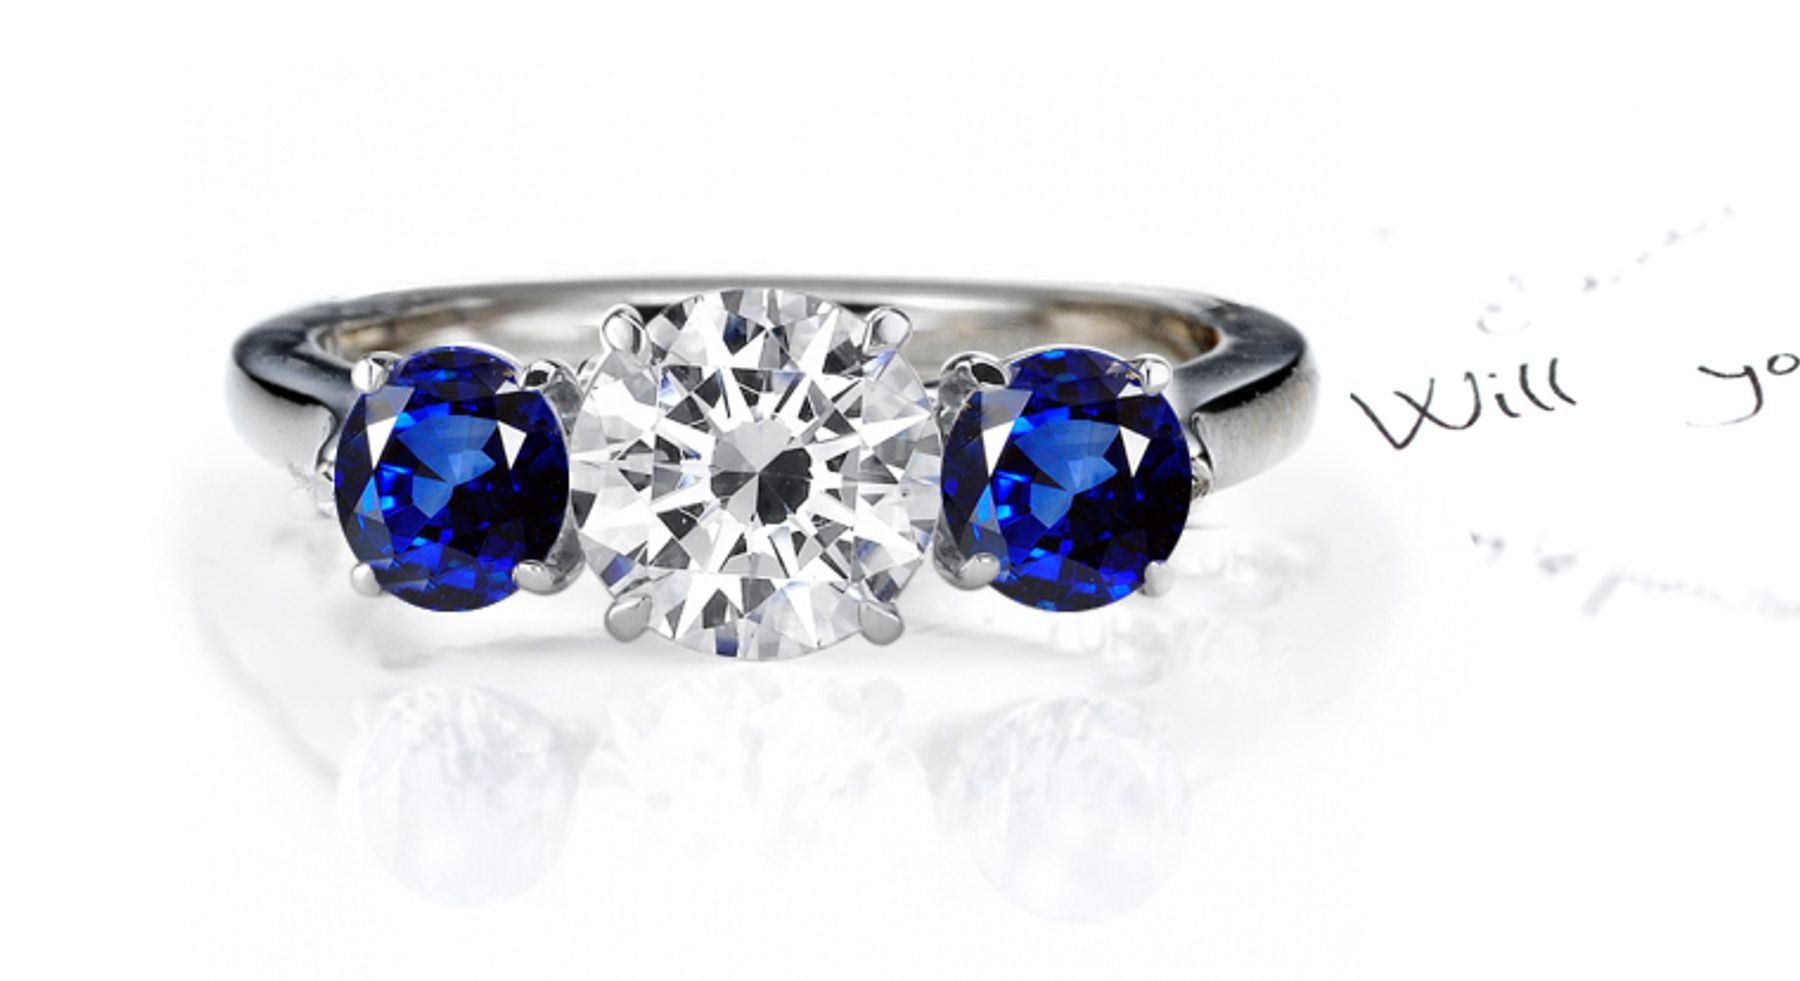 Poland September Birthstones Fine Deep Blue Color Blazing Clarity Sapphire Ring With Diamonds in 14k White Gold